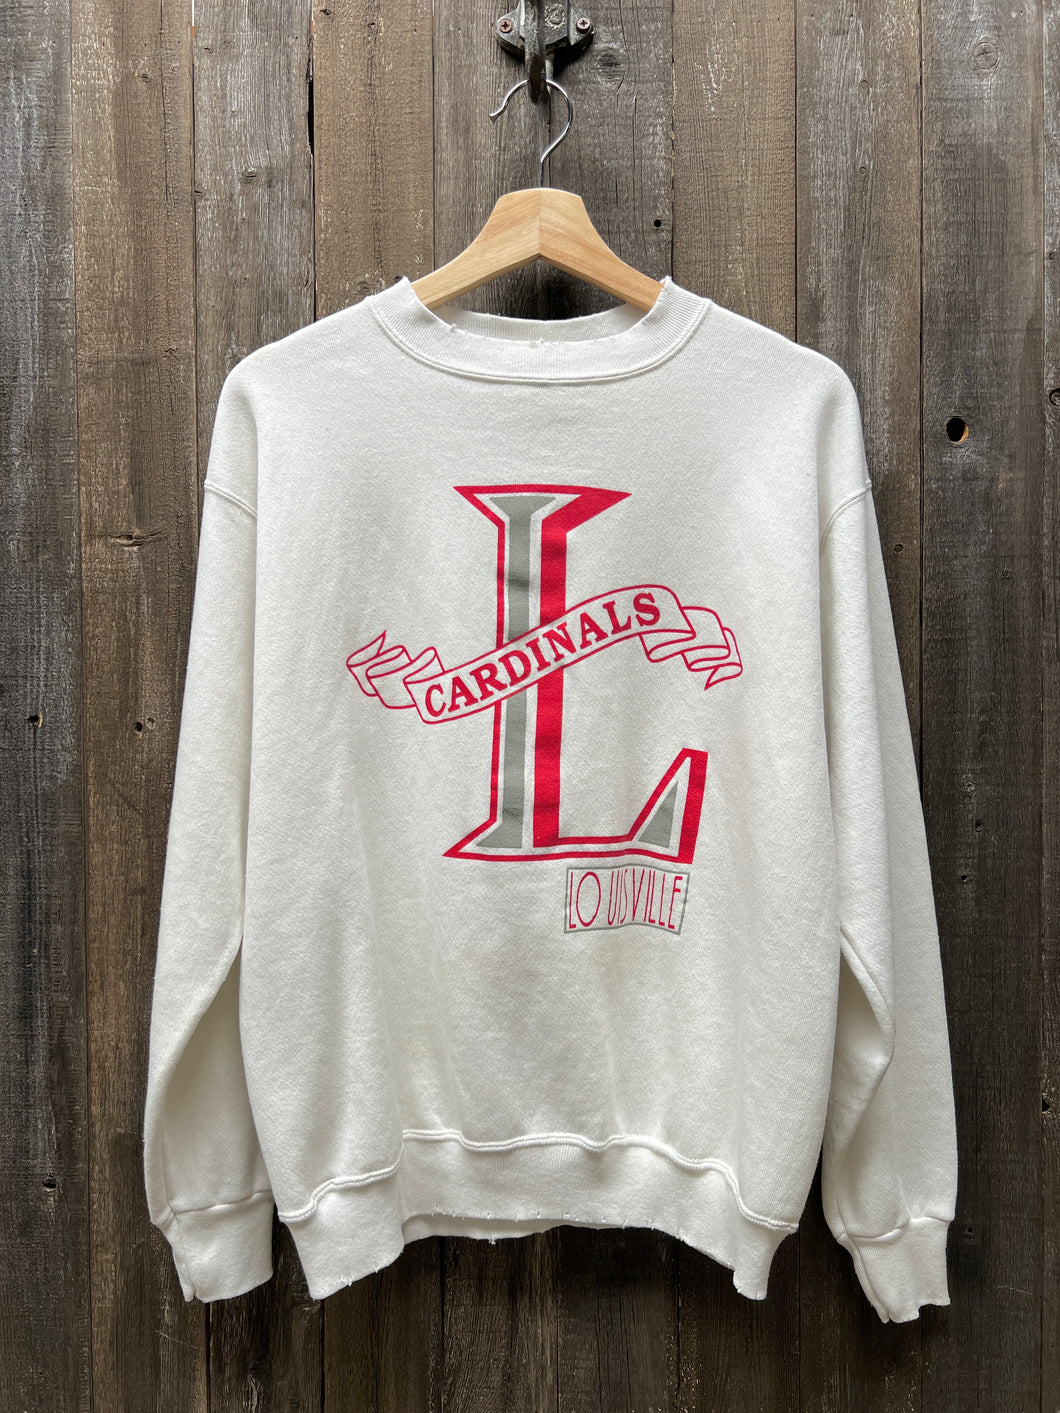 Cardinals Sweatshirt - S/M-Customize Your Embroidery Wording